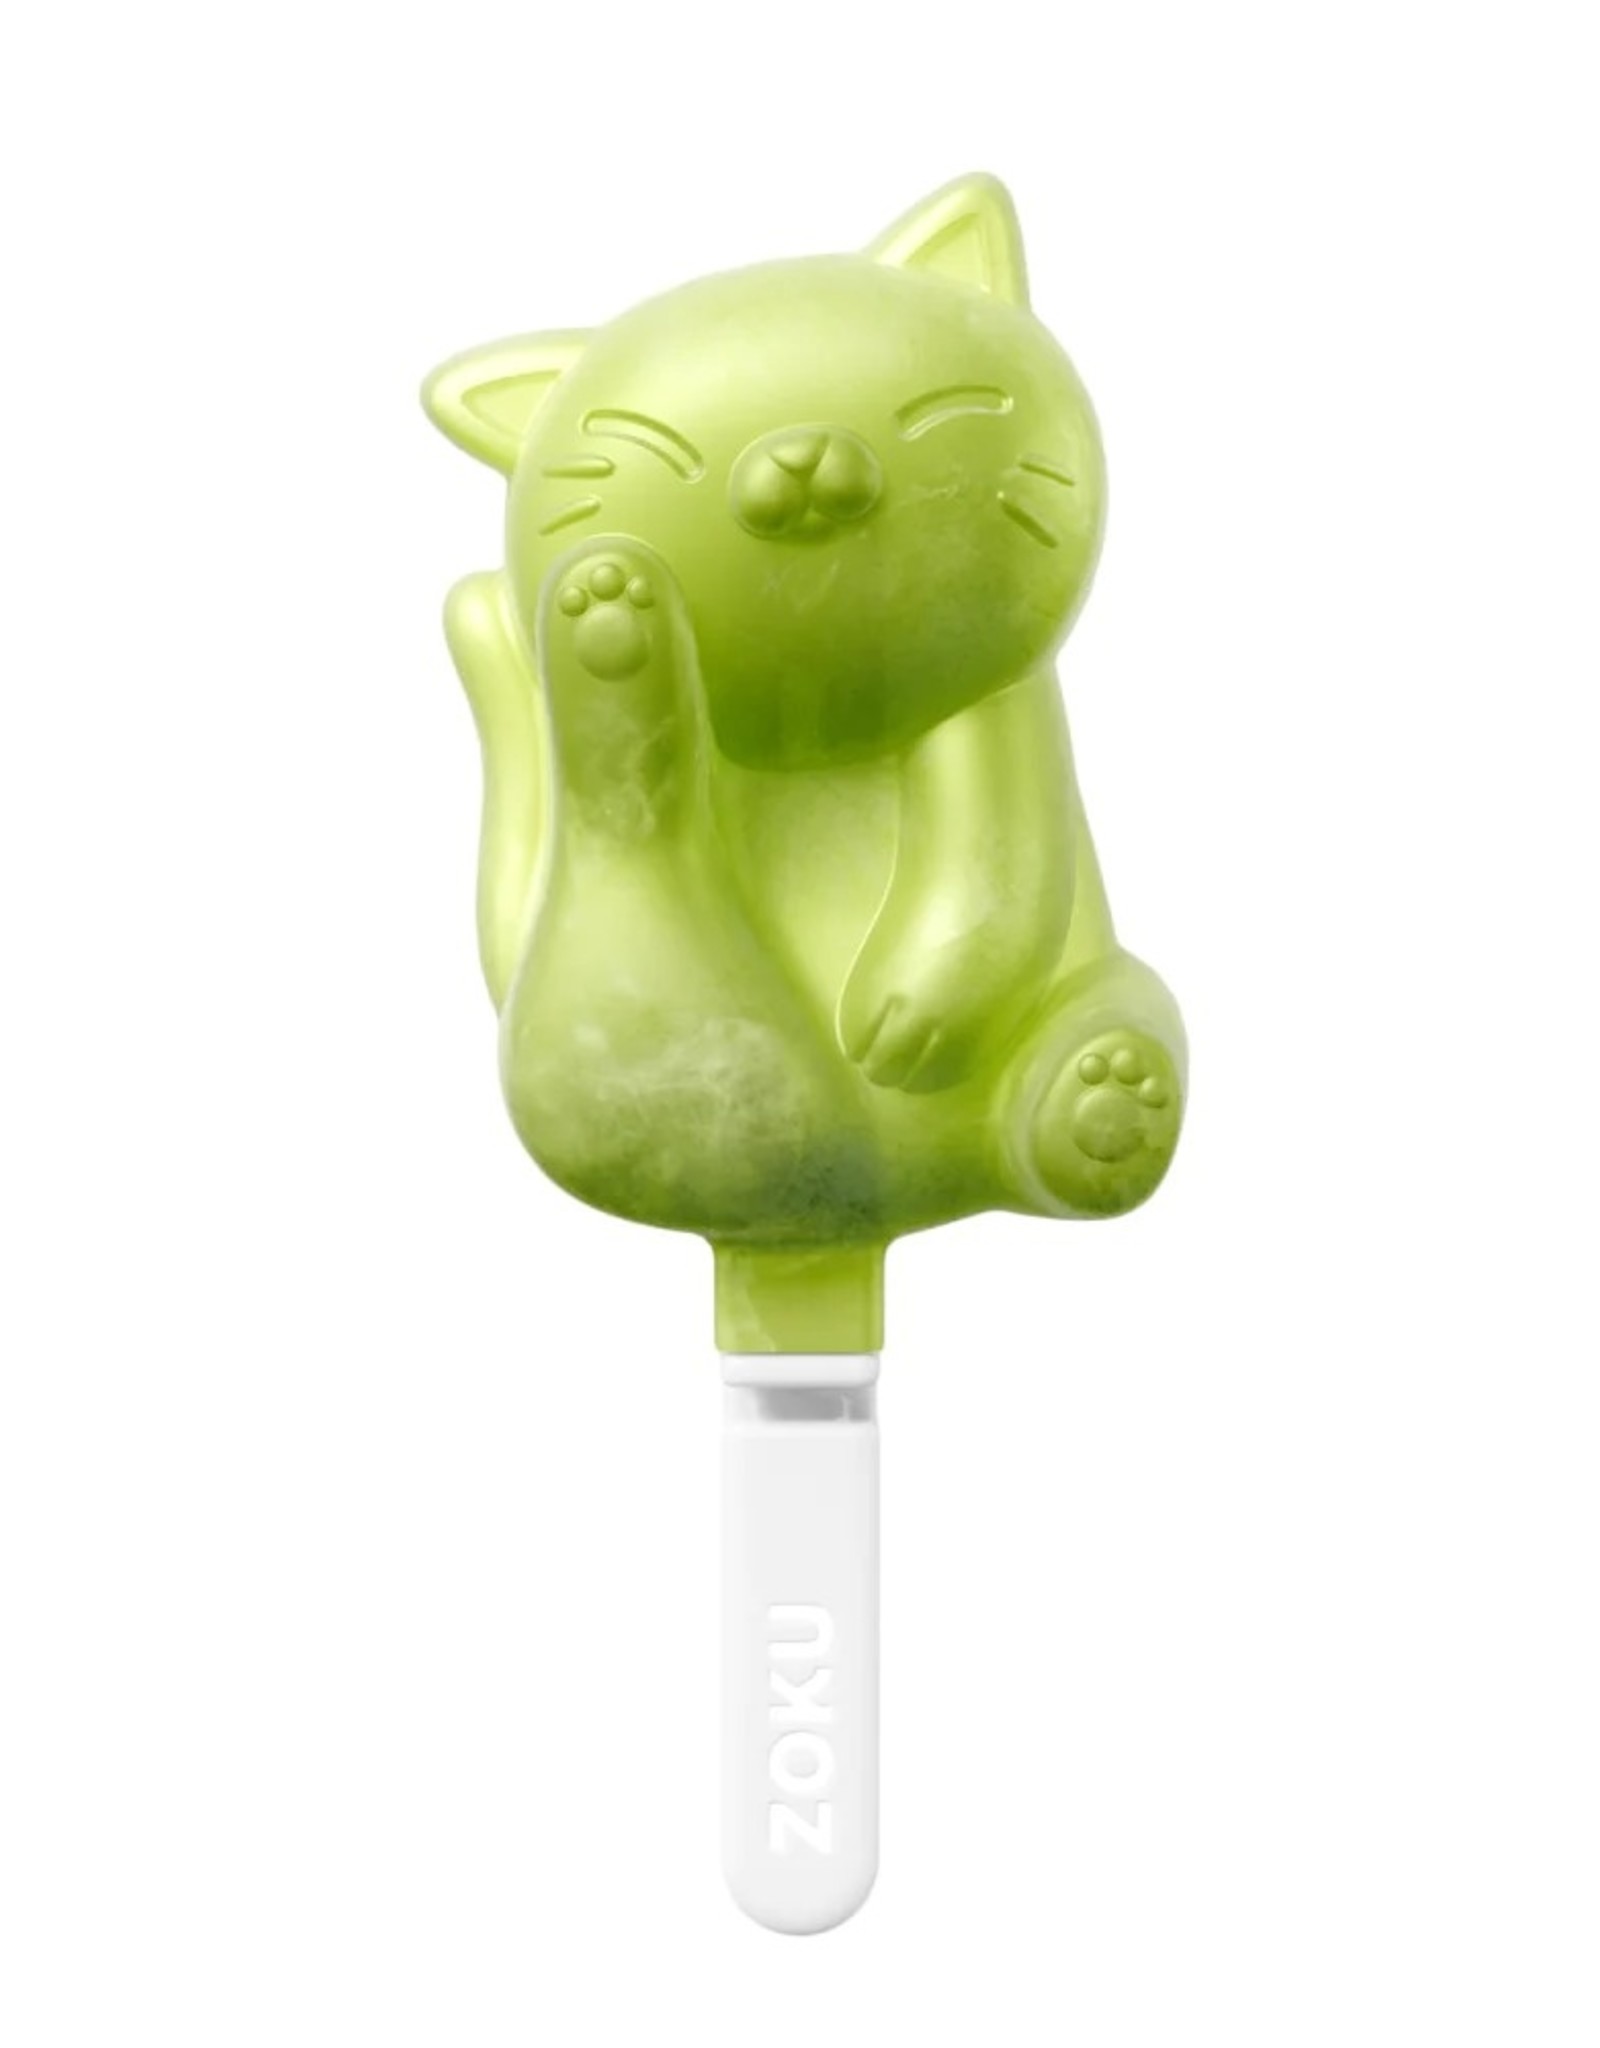 Zoku Cat and Dog Ice Pop Molds